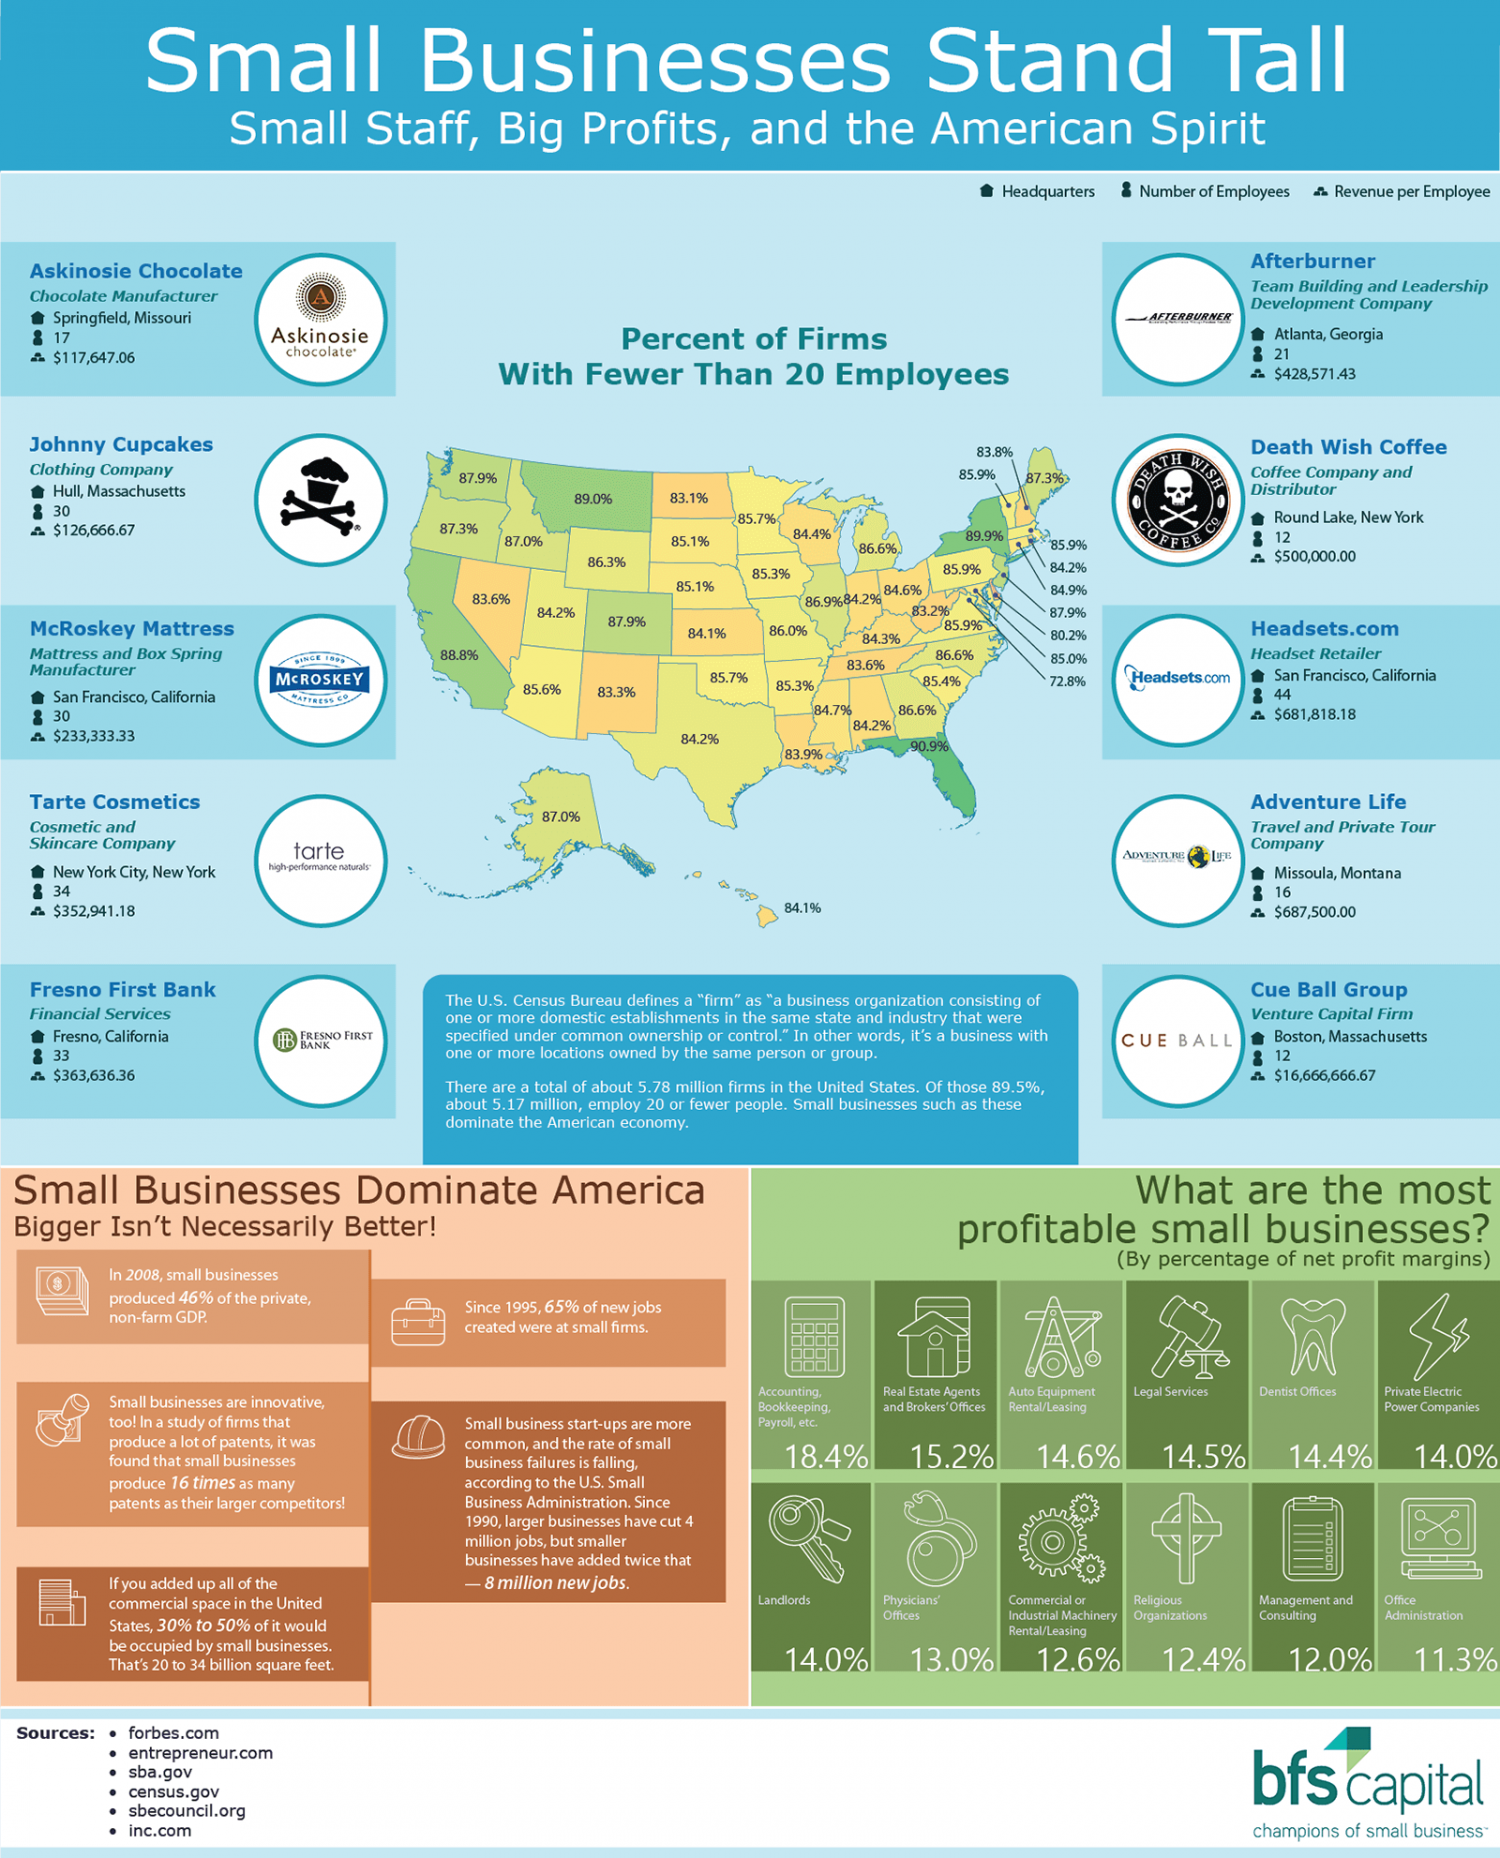 Small Businesses Stand Tall: Small Staff, Big Profits, and the American Spirit Infographic